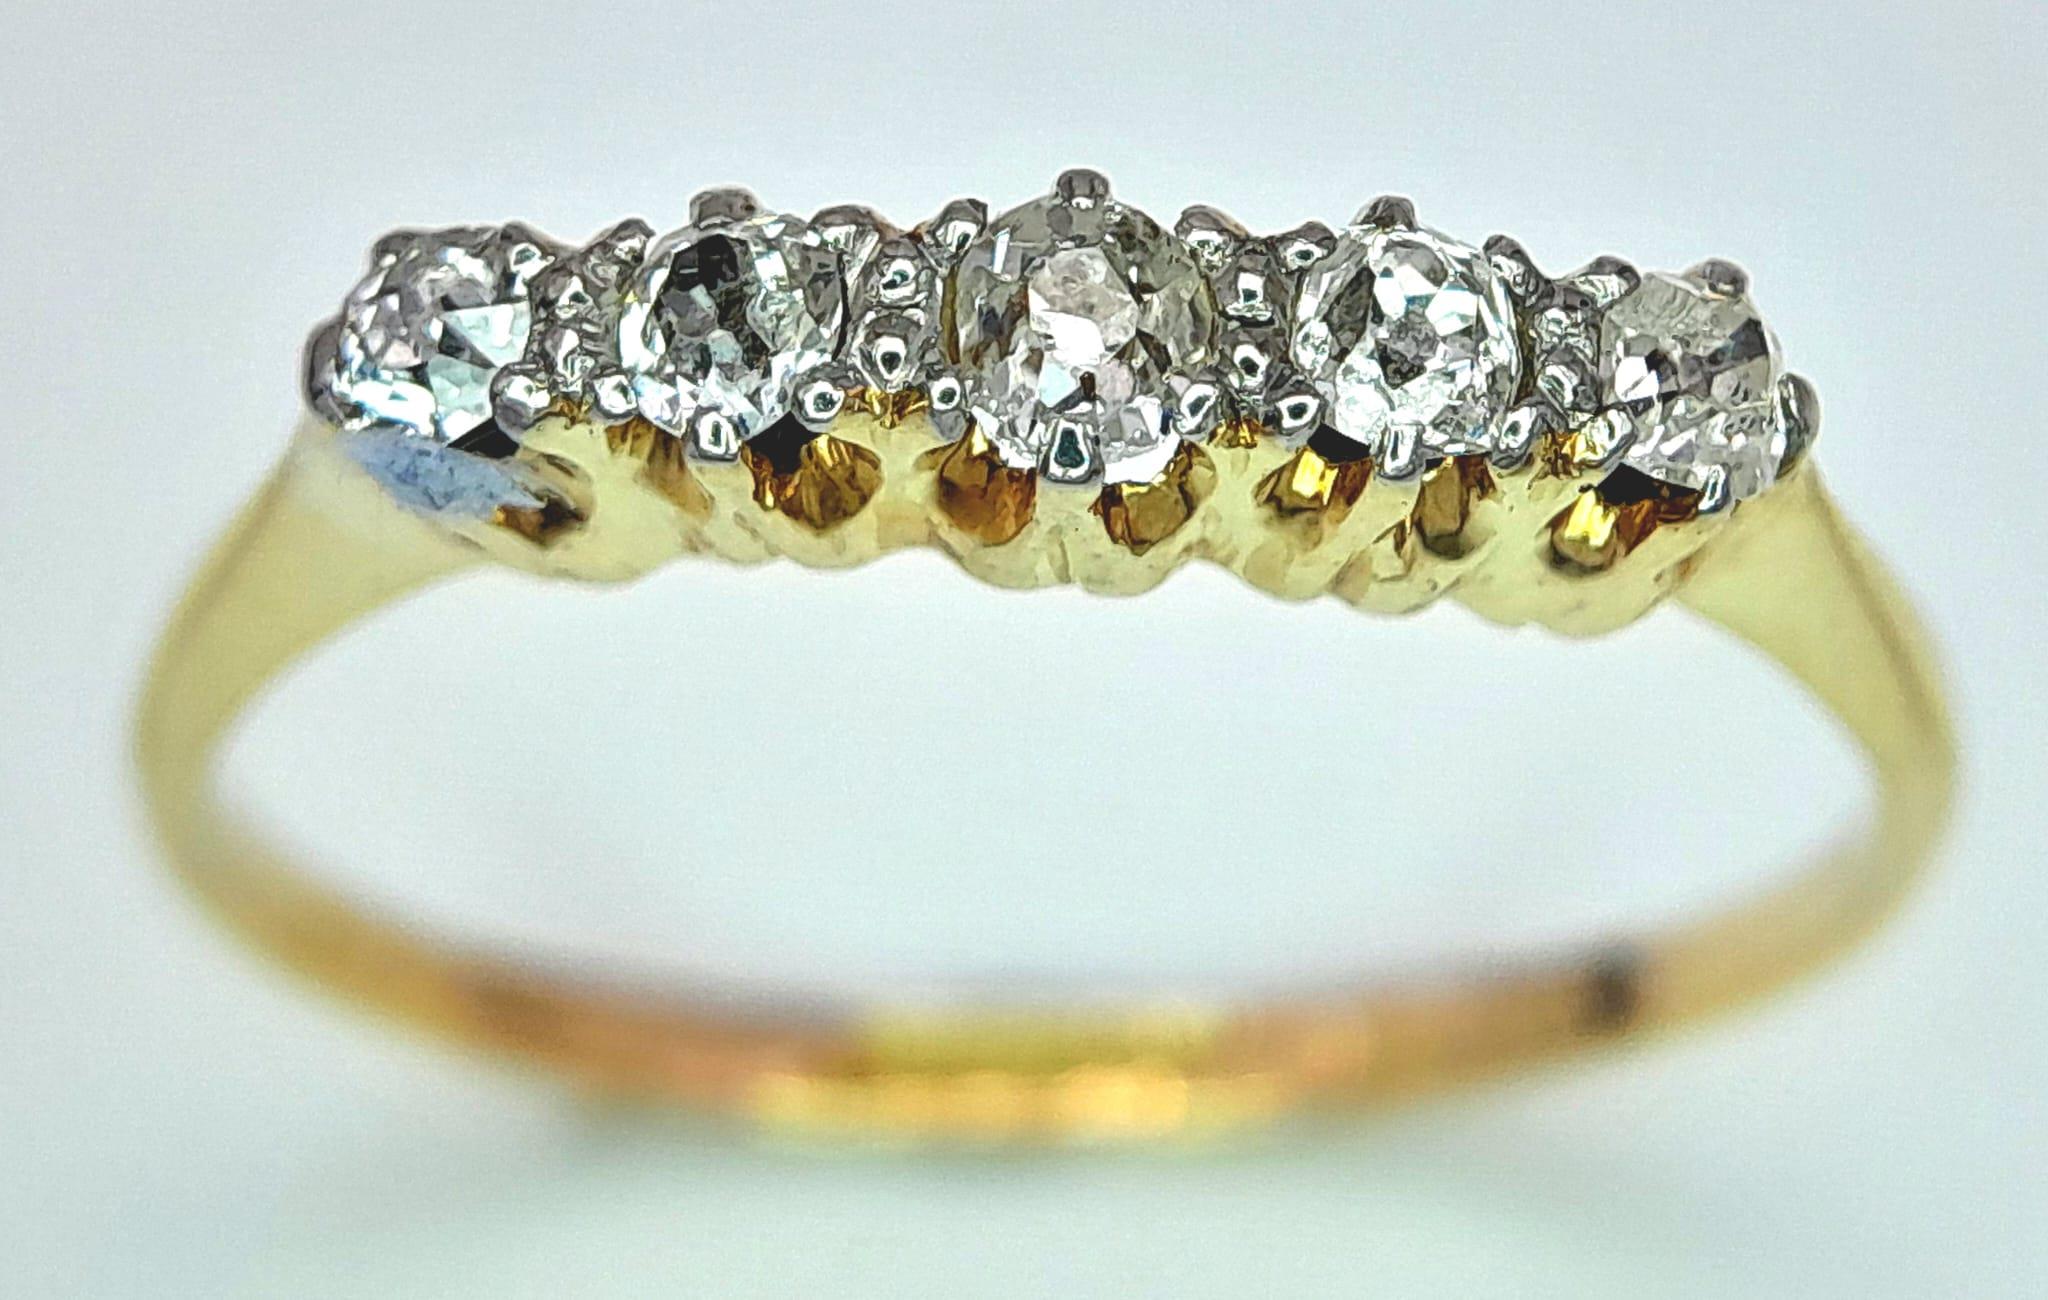 An 18K Yellow Gold and Platinum Vintage Old Cut Diamond 5 Stone Ring. 0.20ctw, Size M, 1.5g total